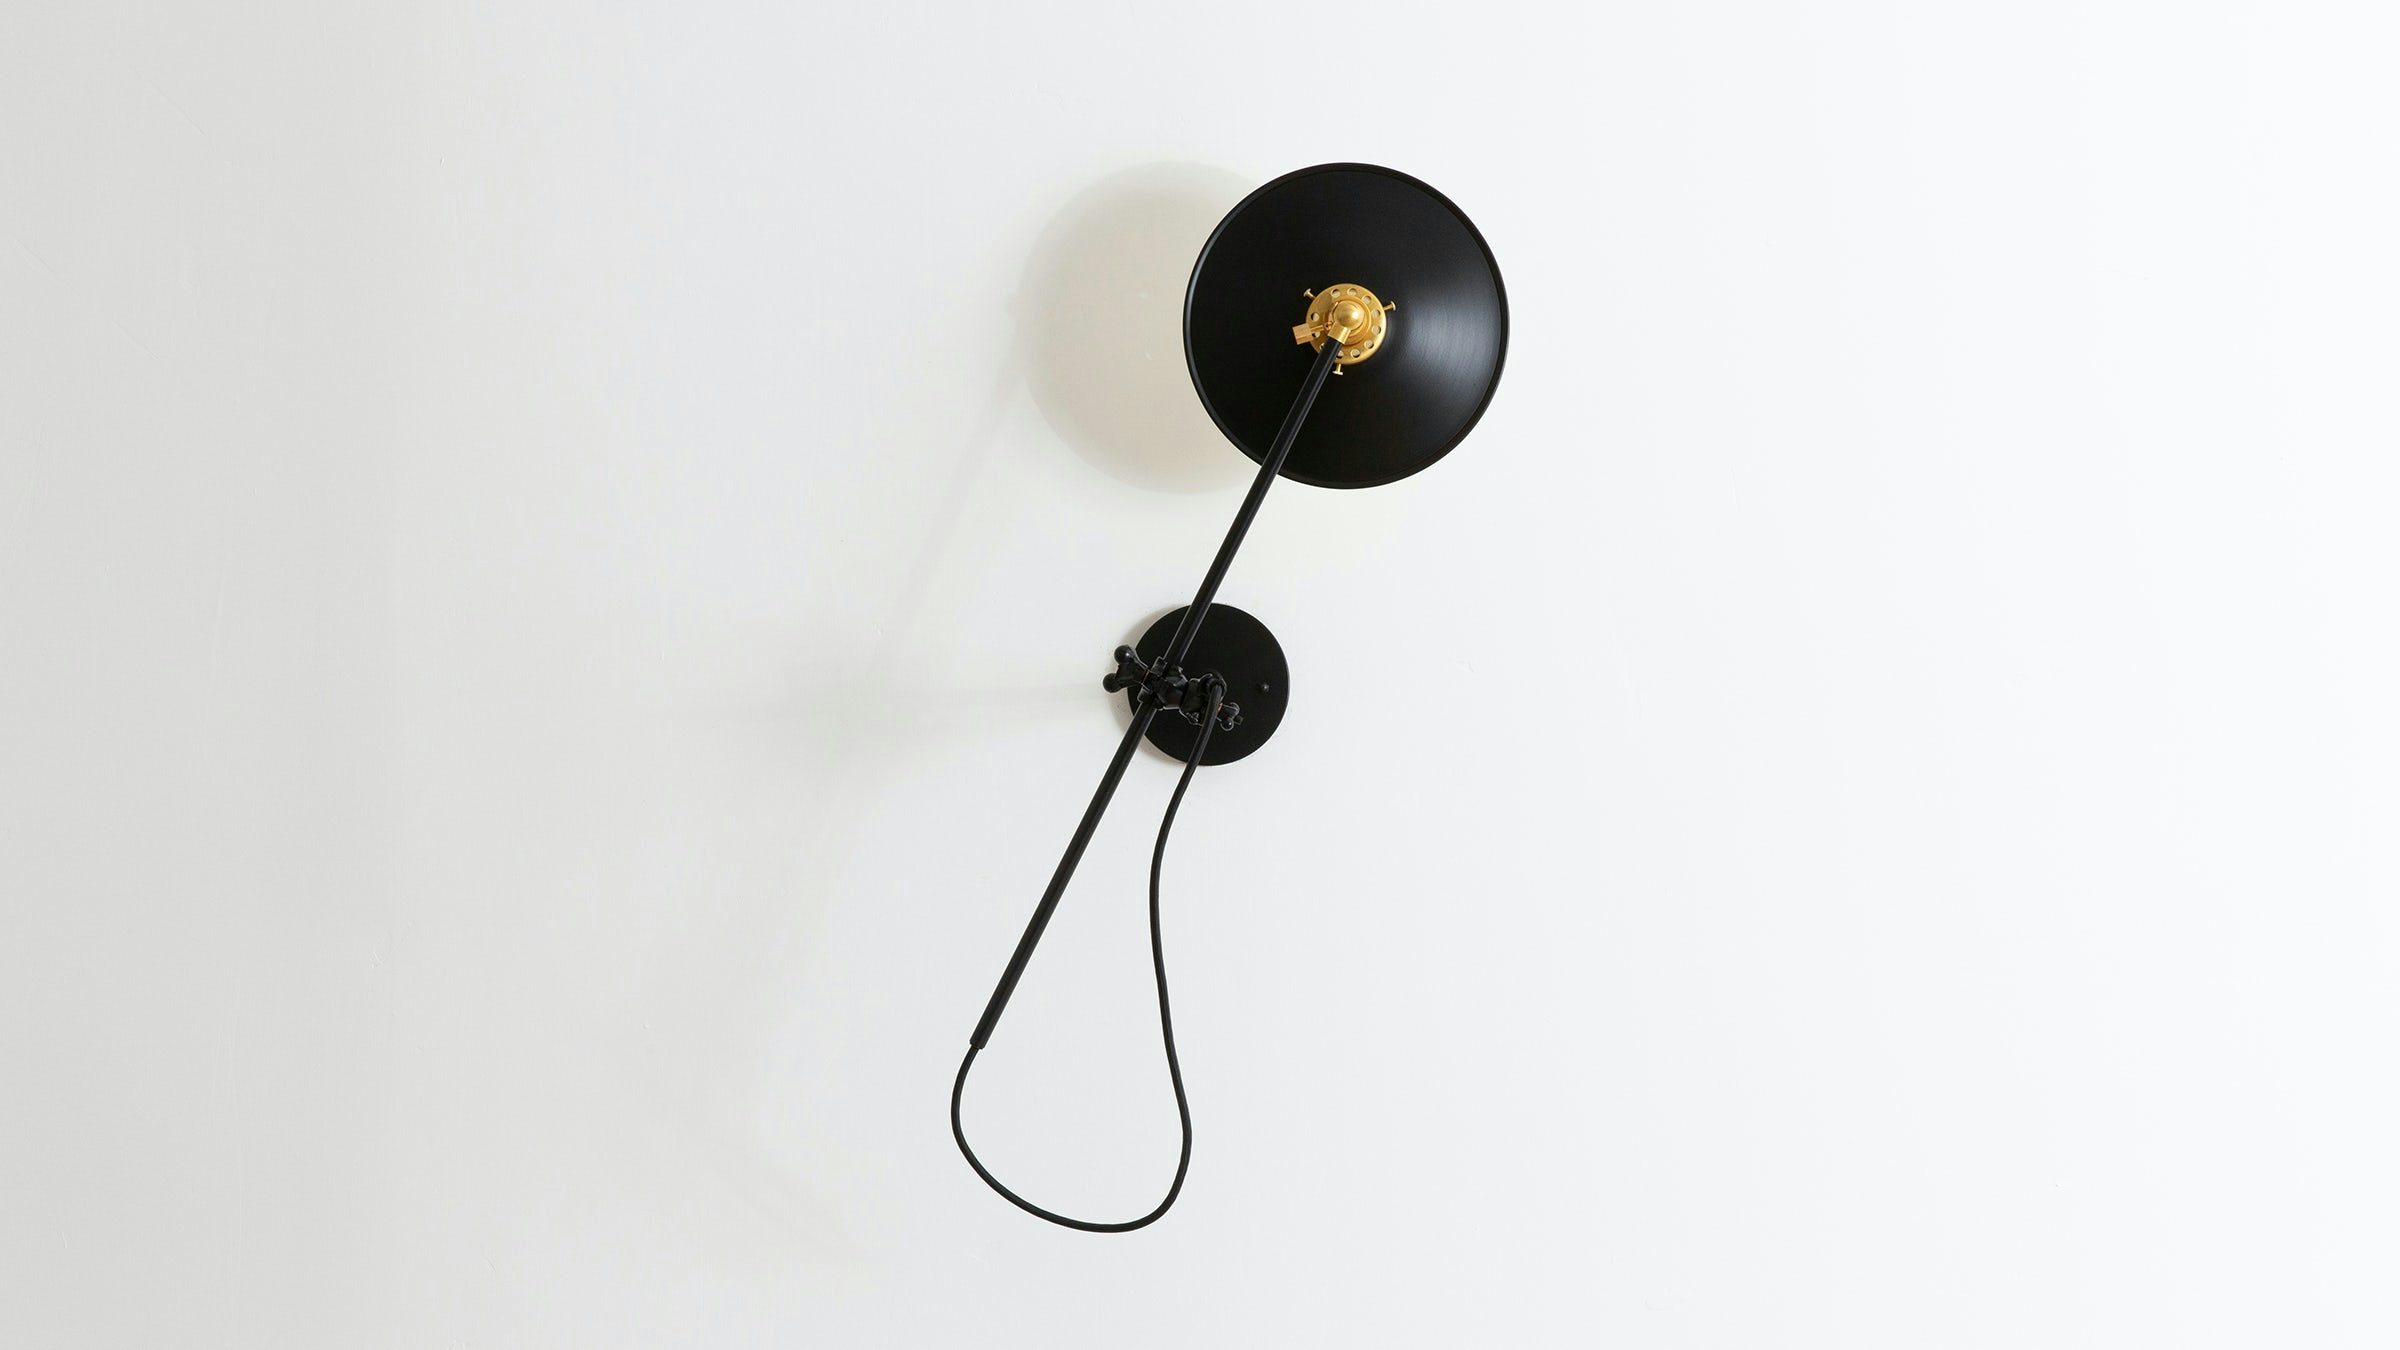 gallery image for WallLamp-1